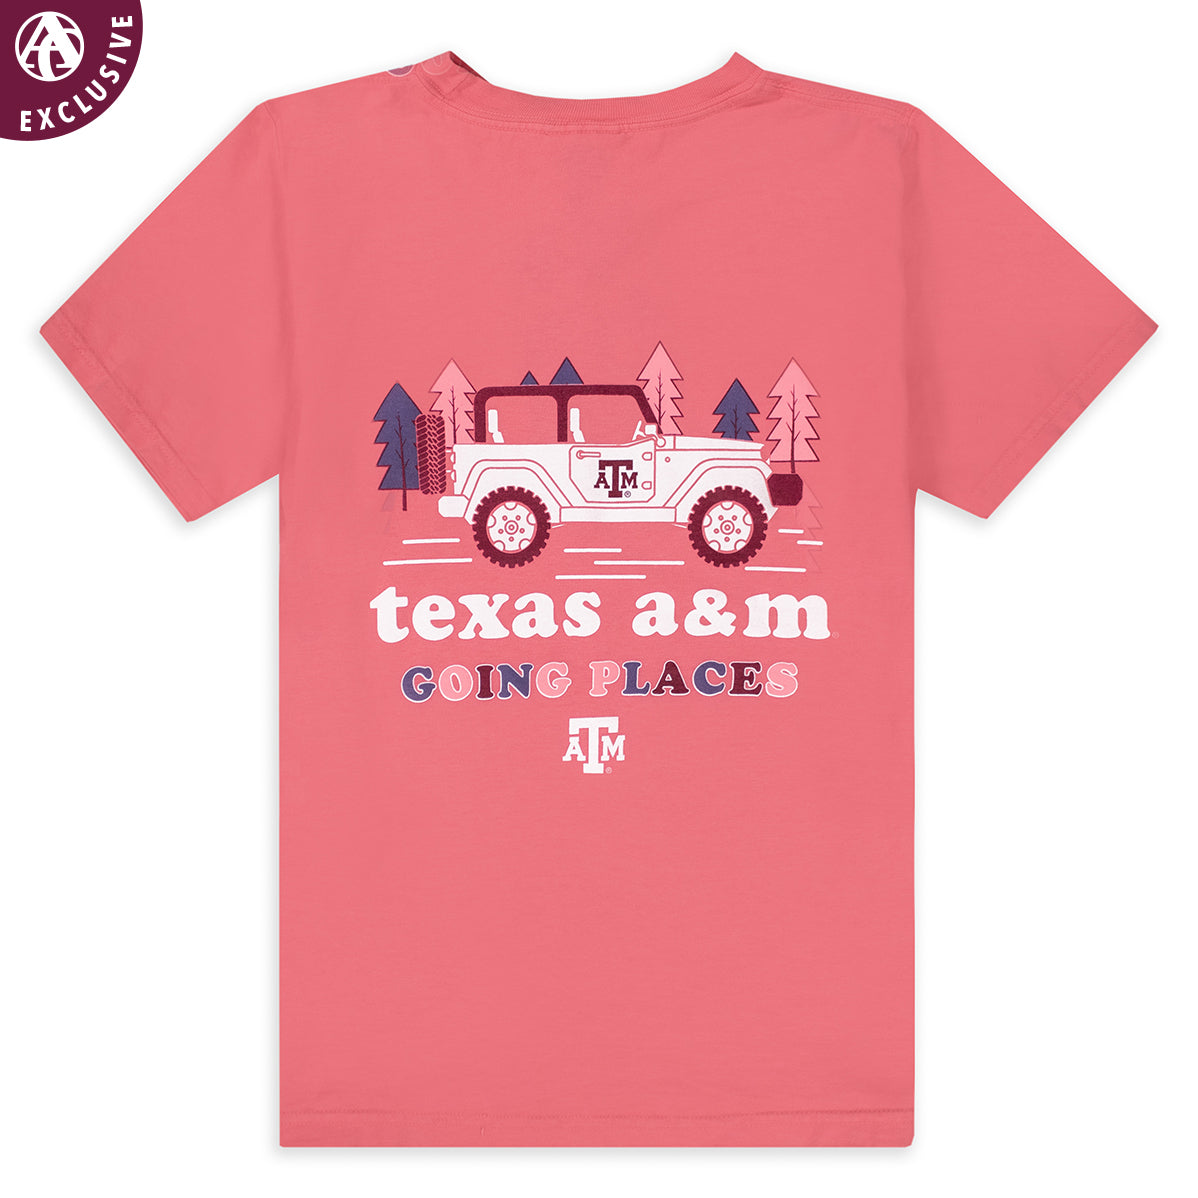 Texas A&M Going Places Jeep ComfortWash Youth T-Shirt